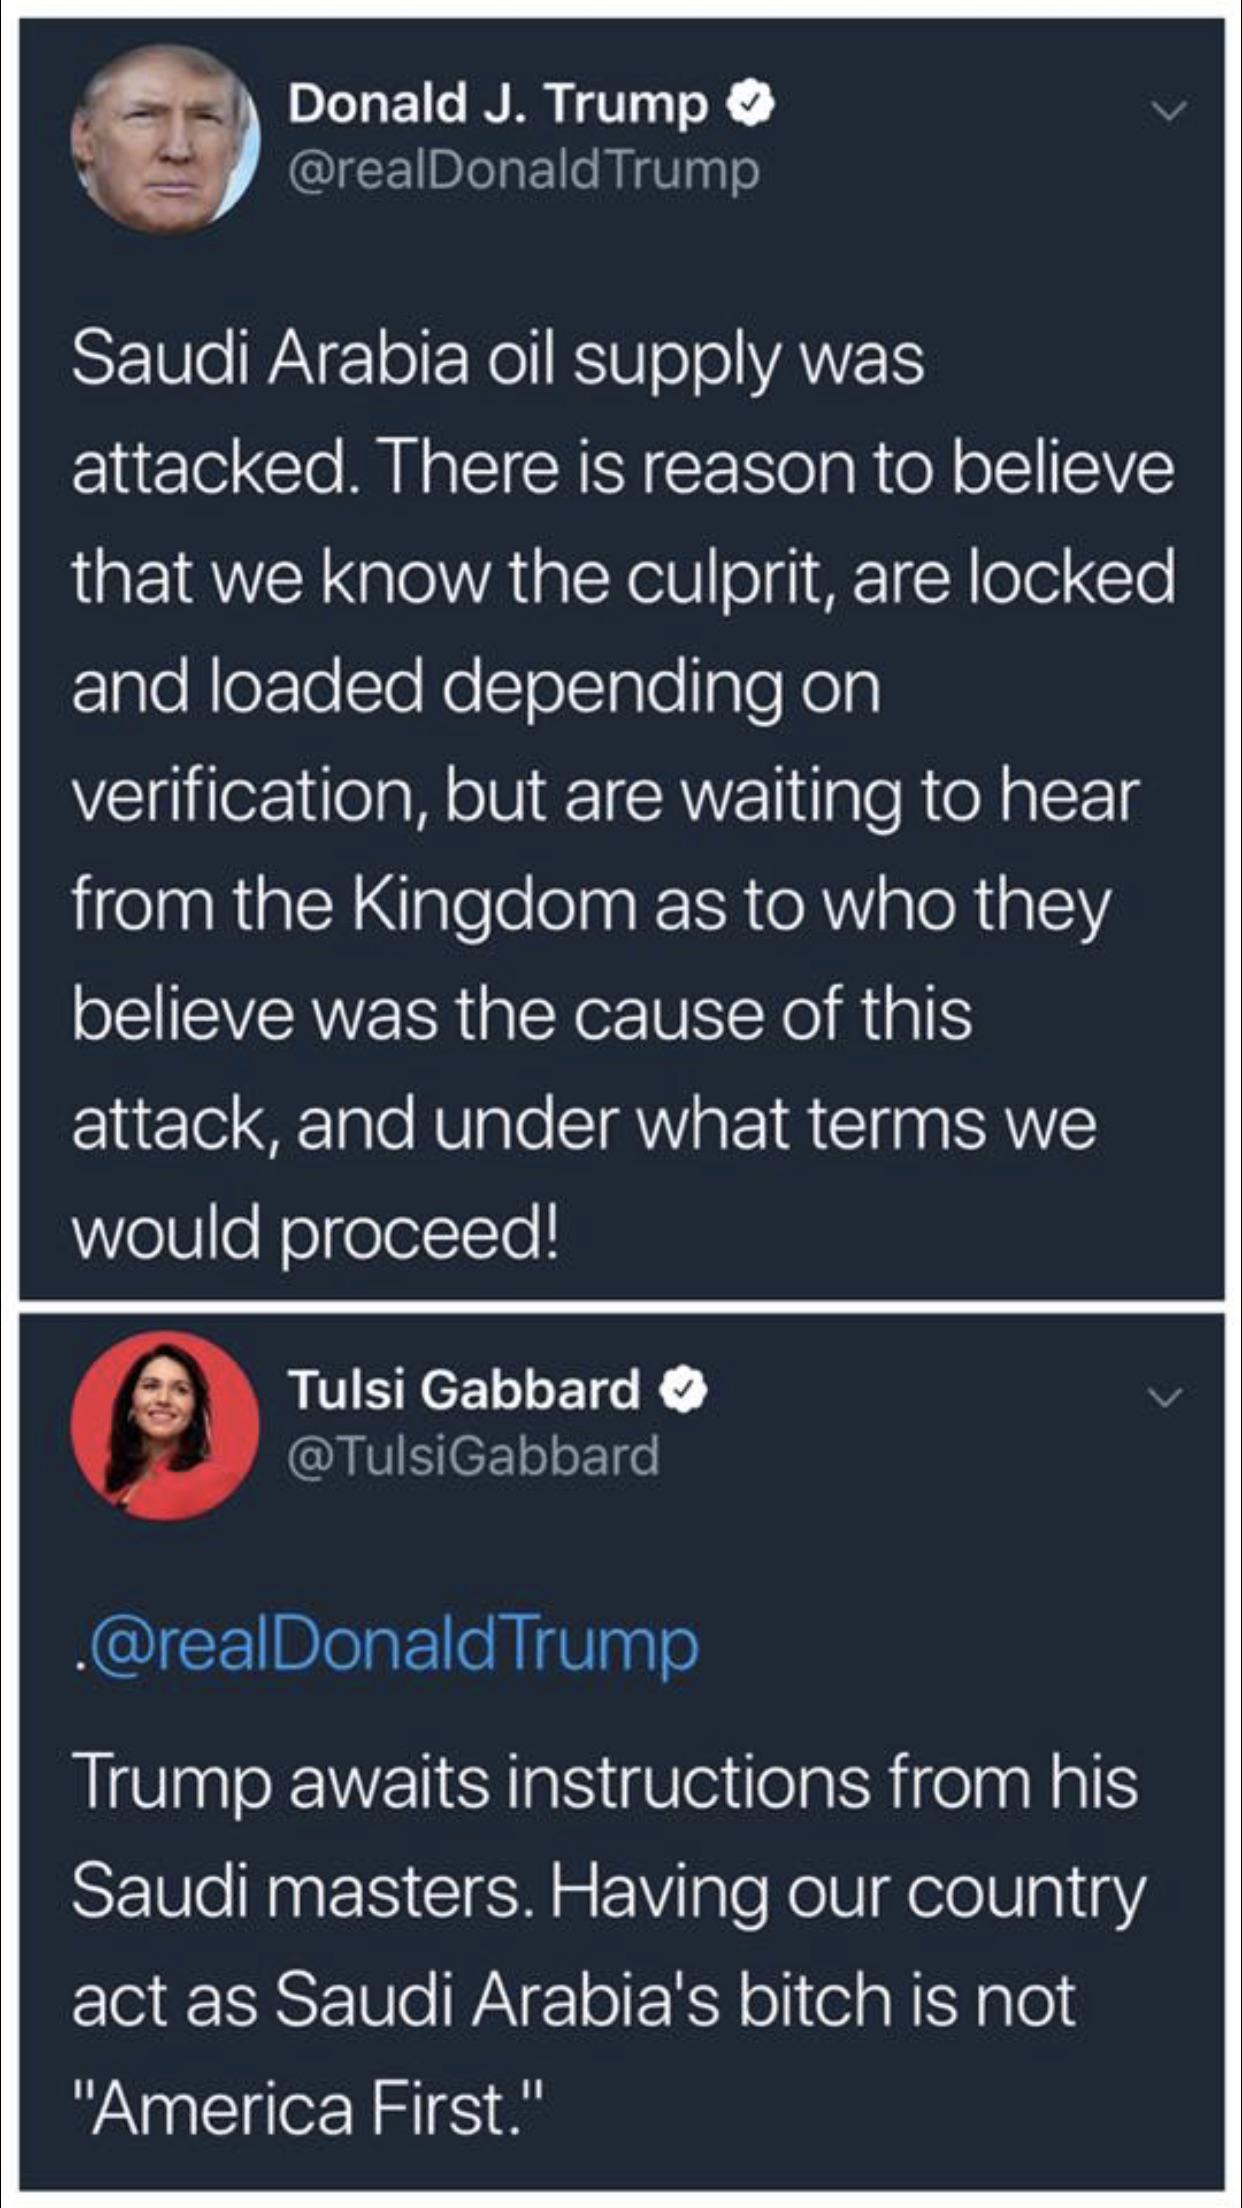 political political-memes political text: Donald J. Trump @realDonaldTrump Saudi Arabia oil supply was attacked. There is reason to believe that we know the culprit, are locked and loaded depending on verification, but are waiting to hear from the Kingdom as to who they believe was the cause Of this attack, and under what terms we would proceed! Tulsi Gabbard e 'K— @TulsiGabbard .@realDonaldTrump Trump awaits instructions from his Saudi masters. Having our country act as Saudi Arabia's bitch is not 